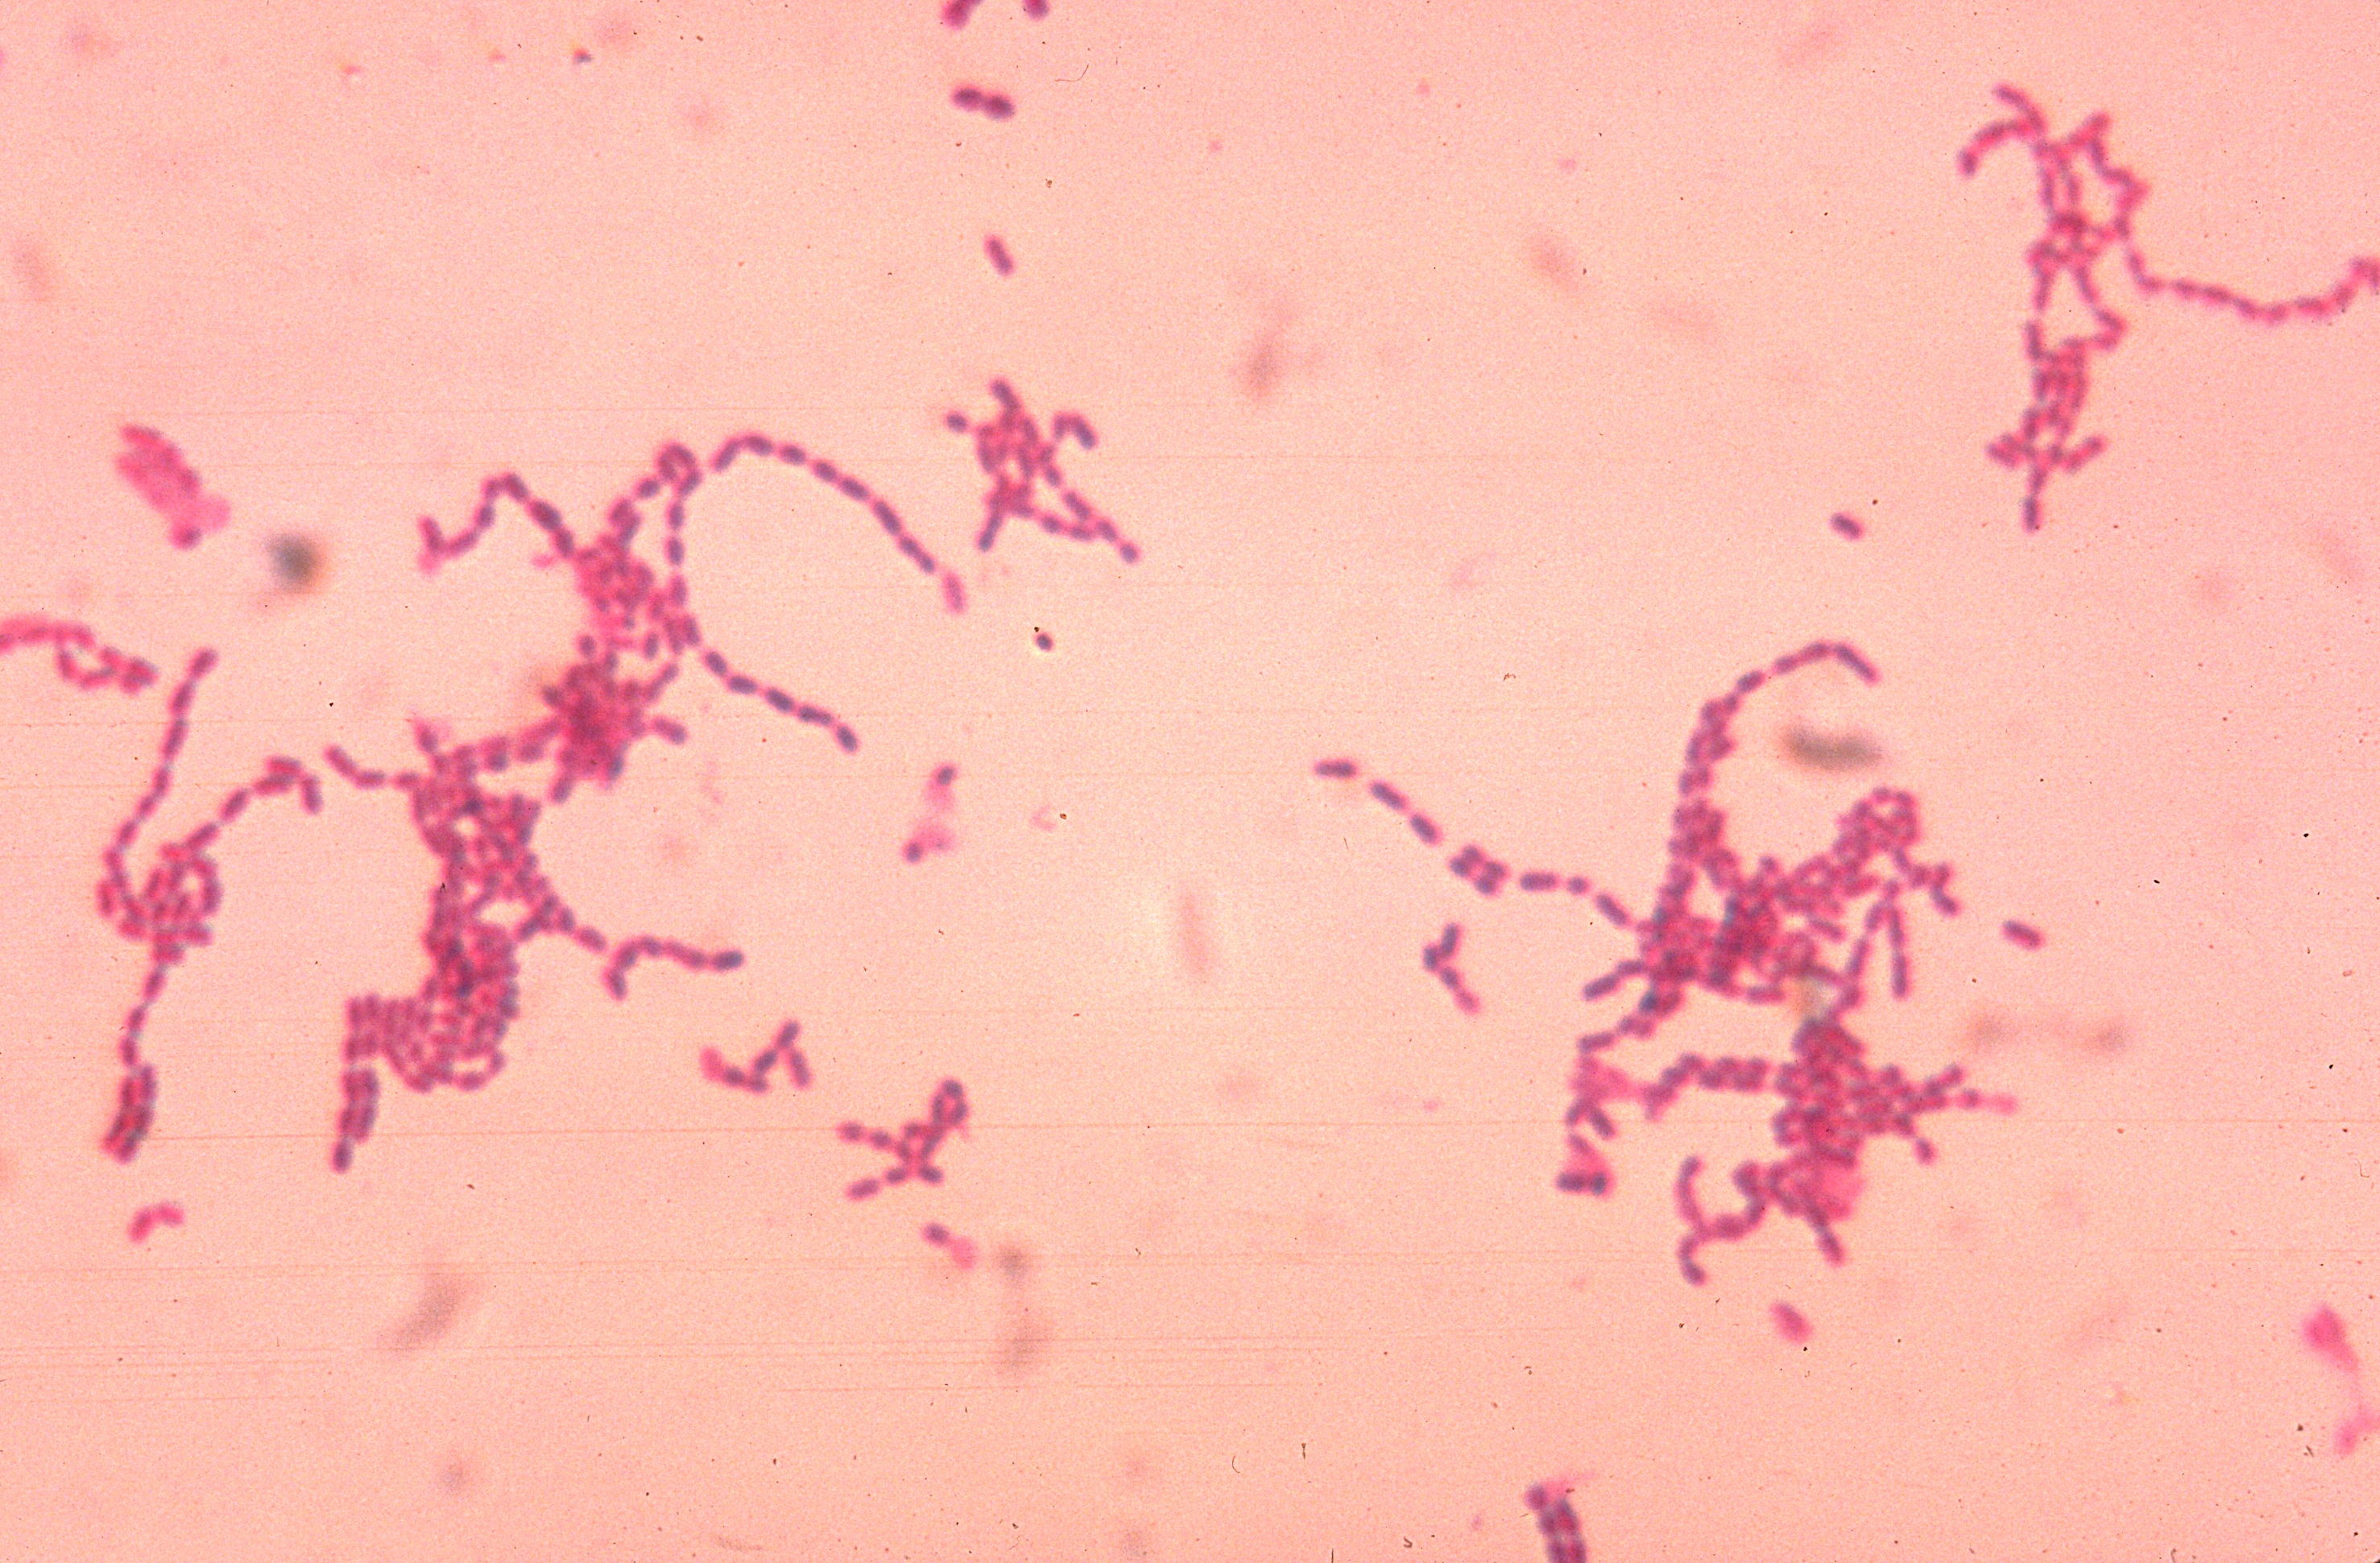 Peptostreptococcus spp. growing in characteristic chain formations.